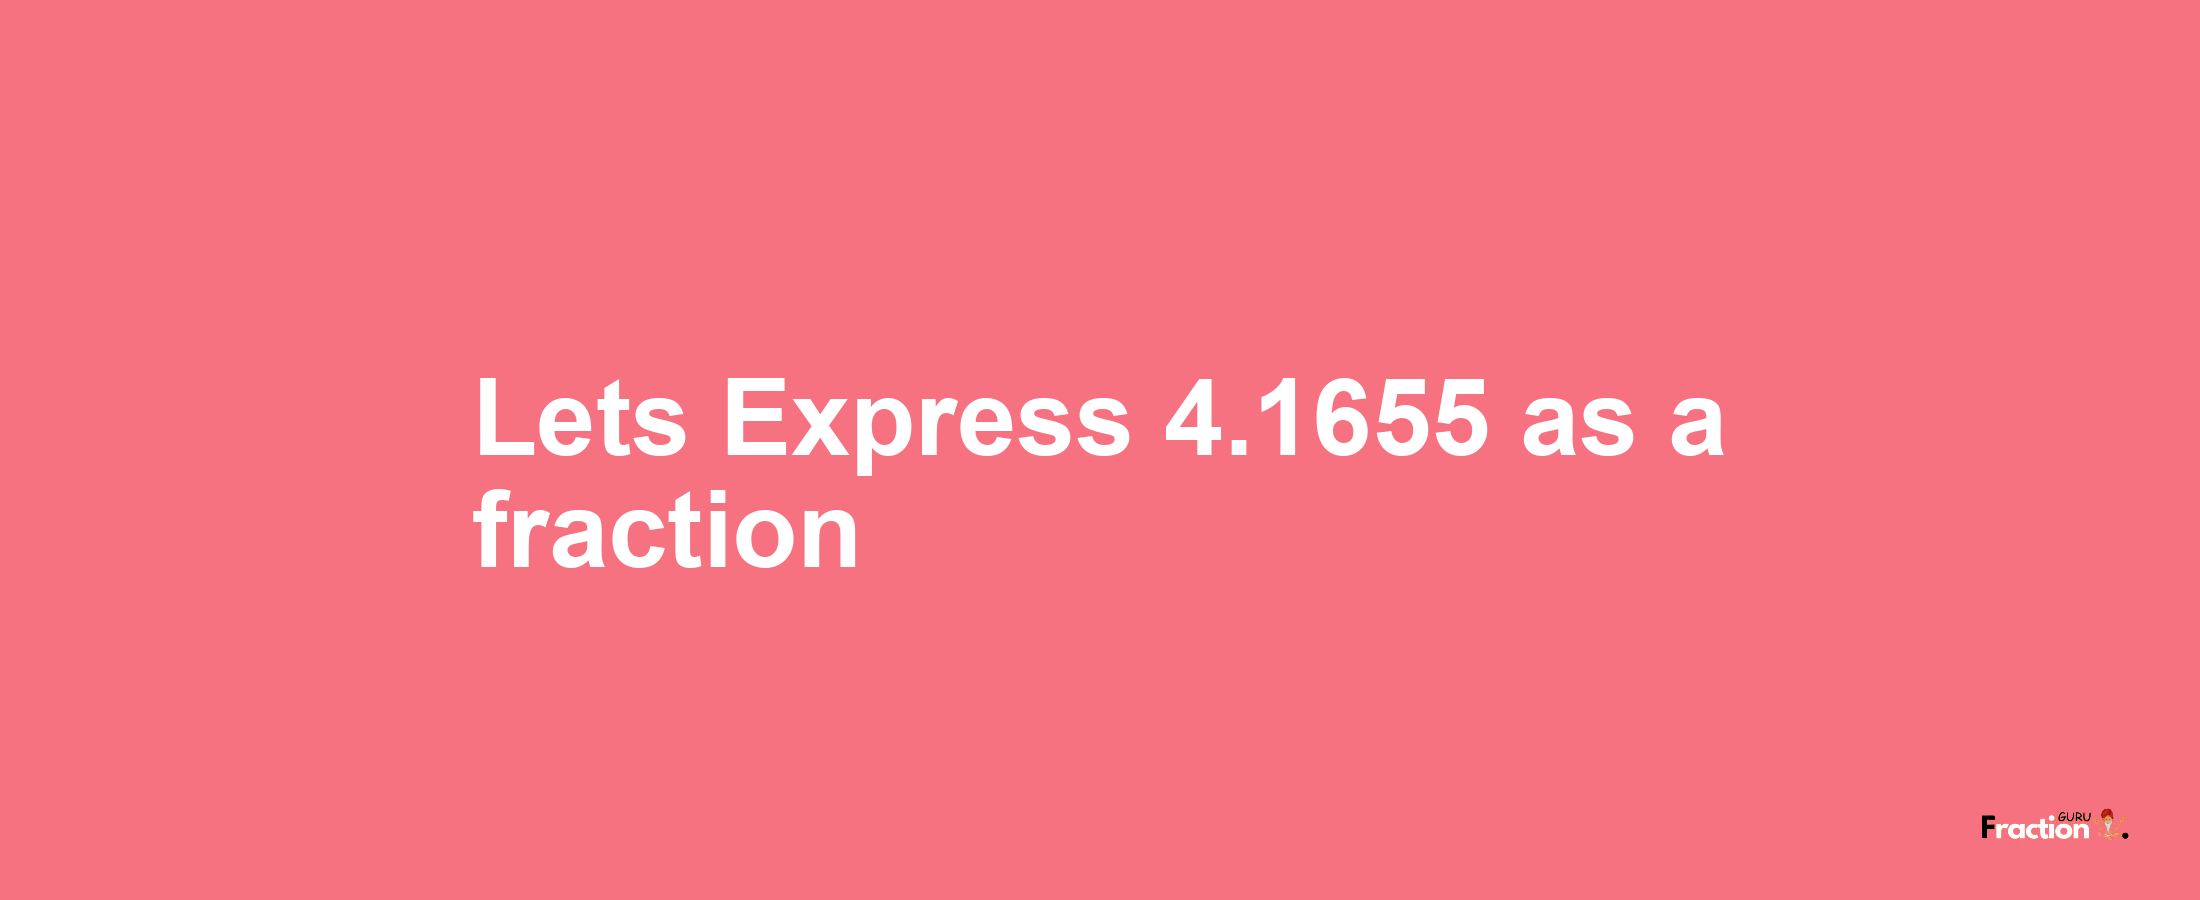 Lets Express 4.1655 as afraction